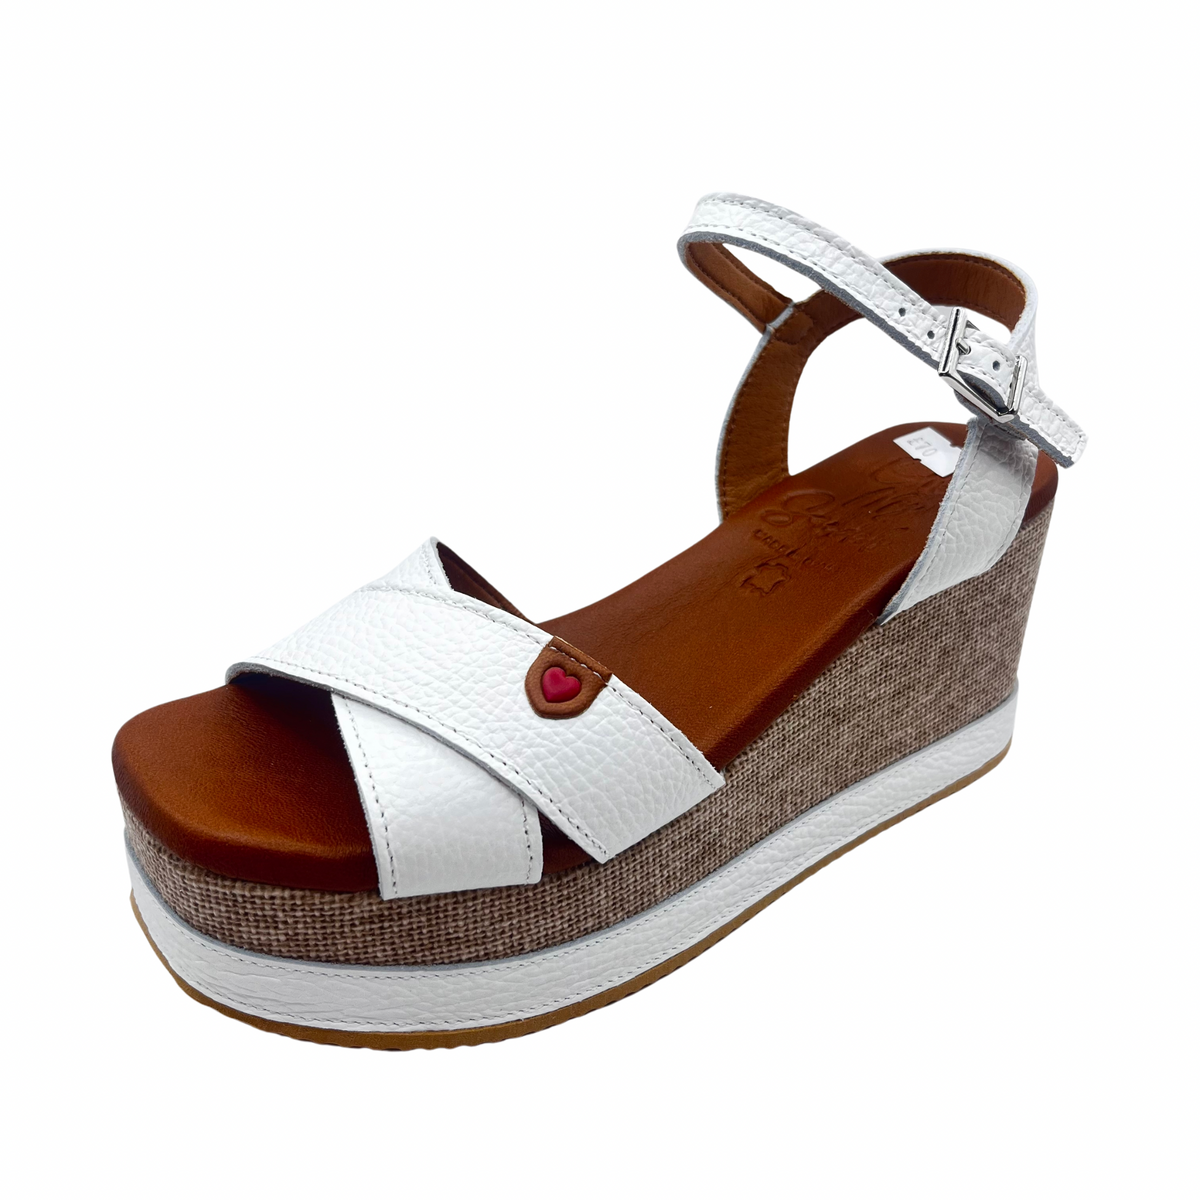 Oh My Sandals Fabric Wedge Leather White Sandal